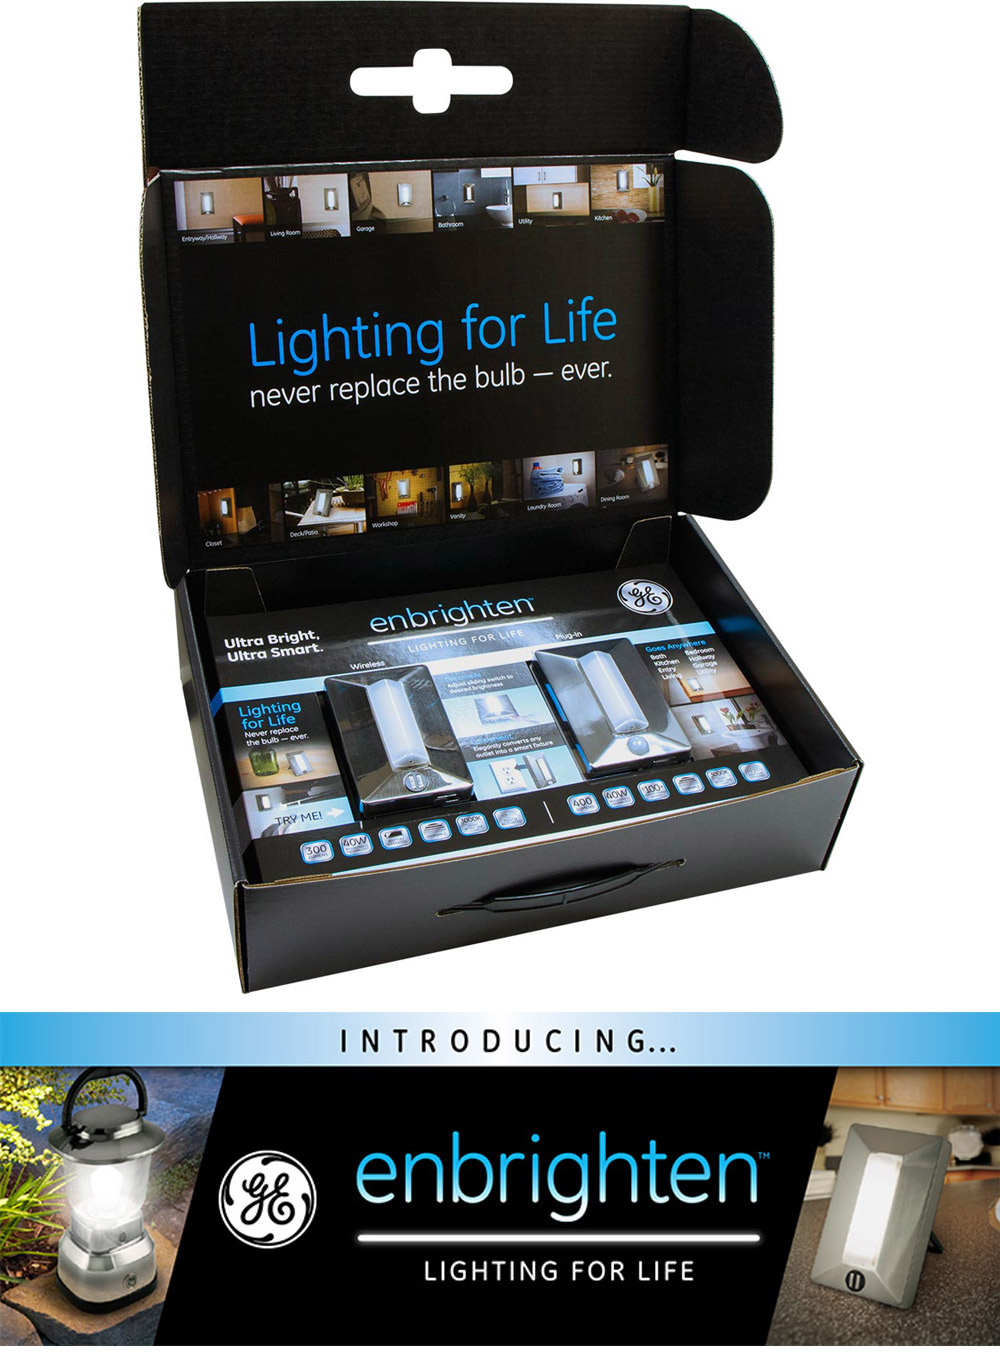  Enbrighten press kit / product release campaign 